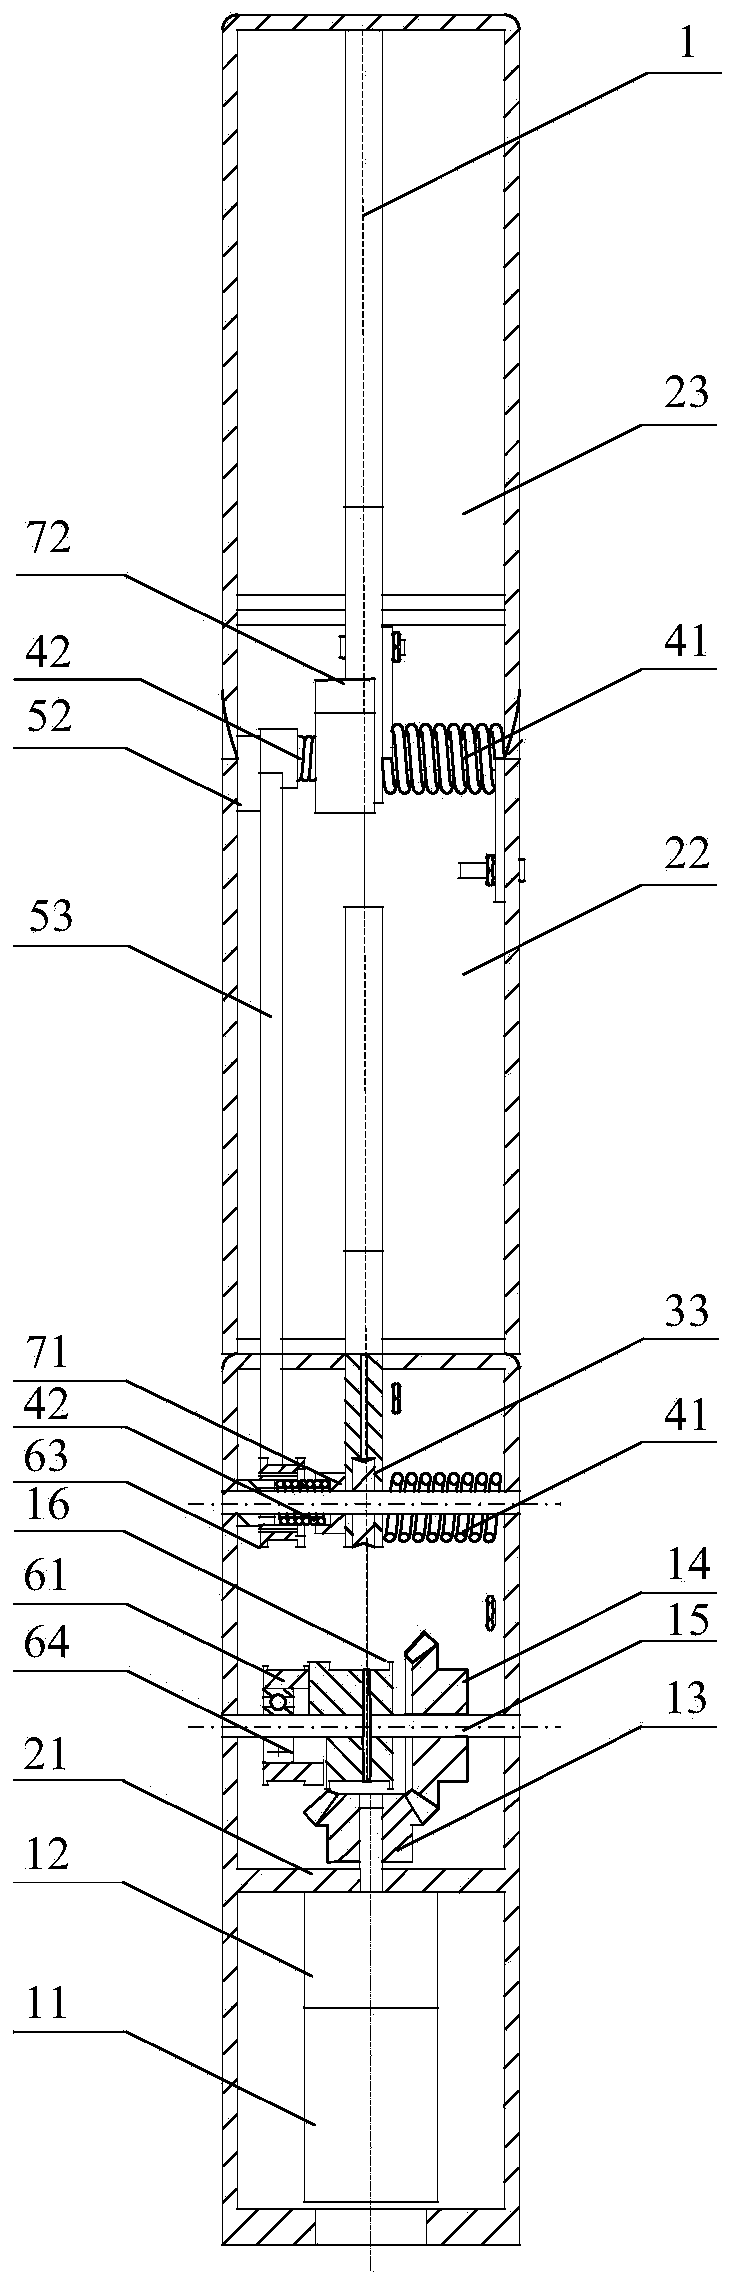 Connecting rod type variable grasping force cooperative self-adaptive finger device